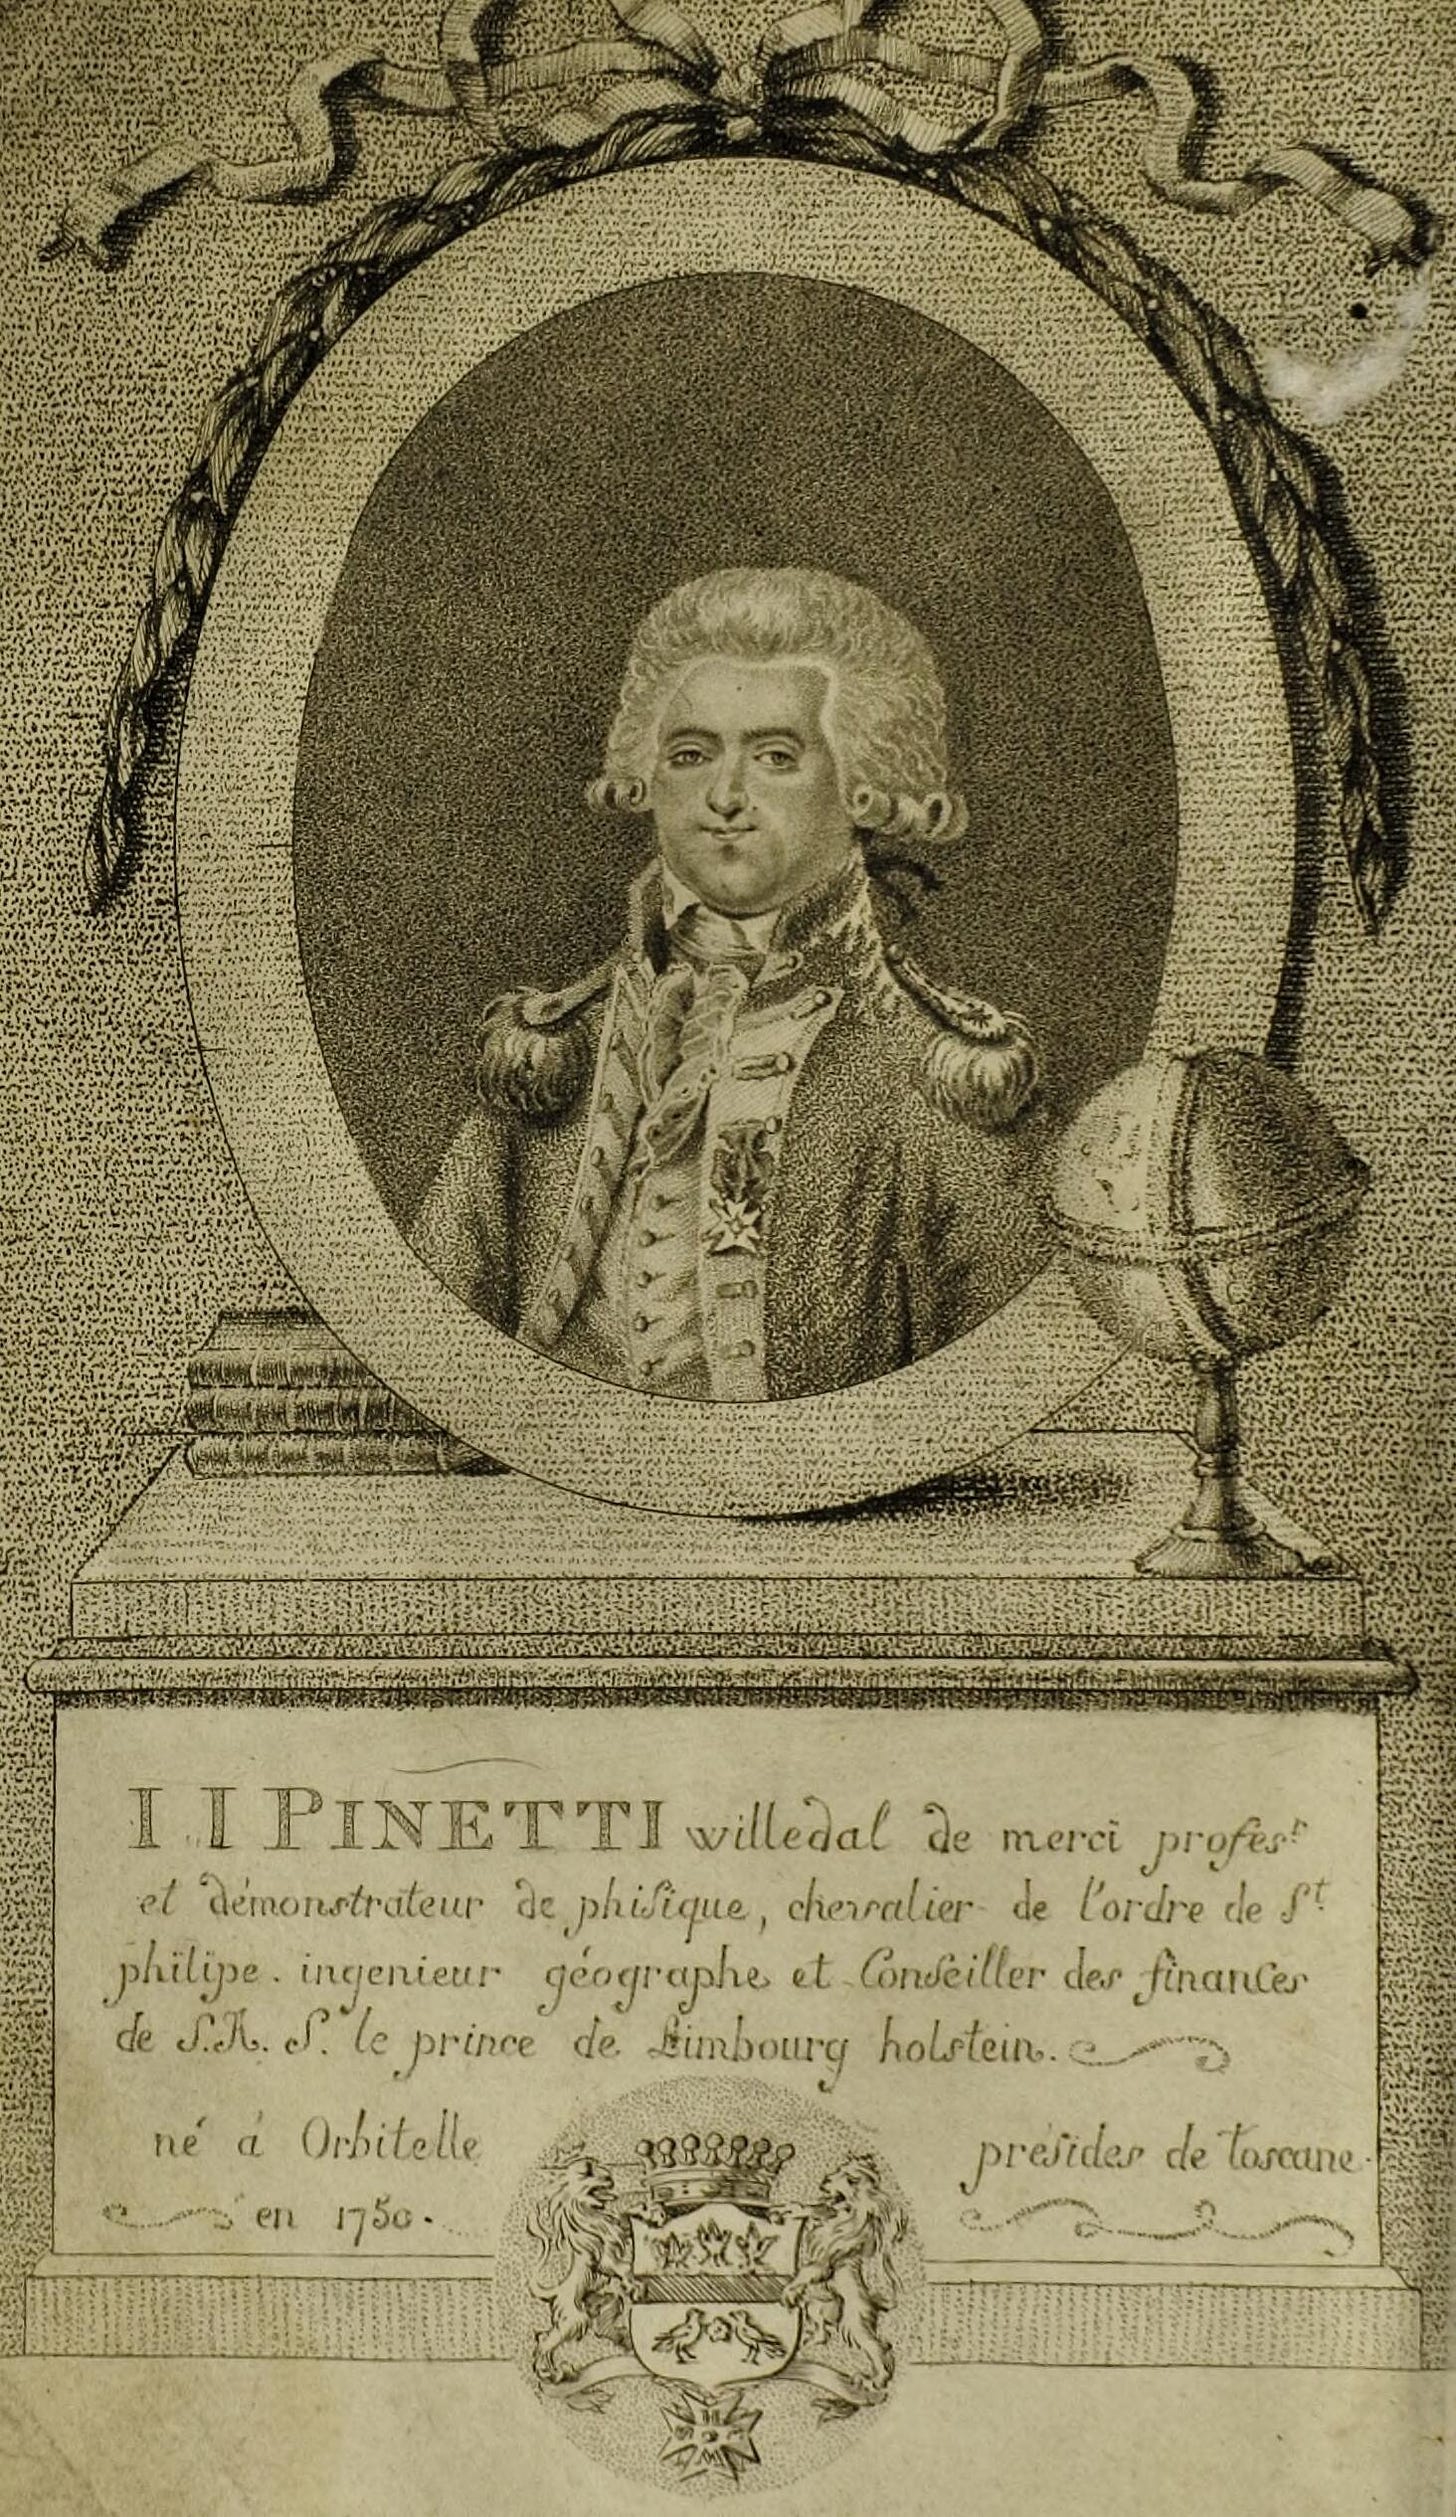 An illustration of a short man in a wig and regal clothing wearing a medal.